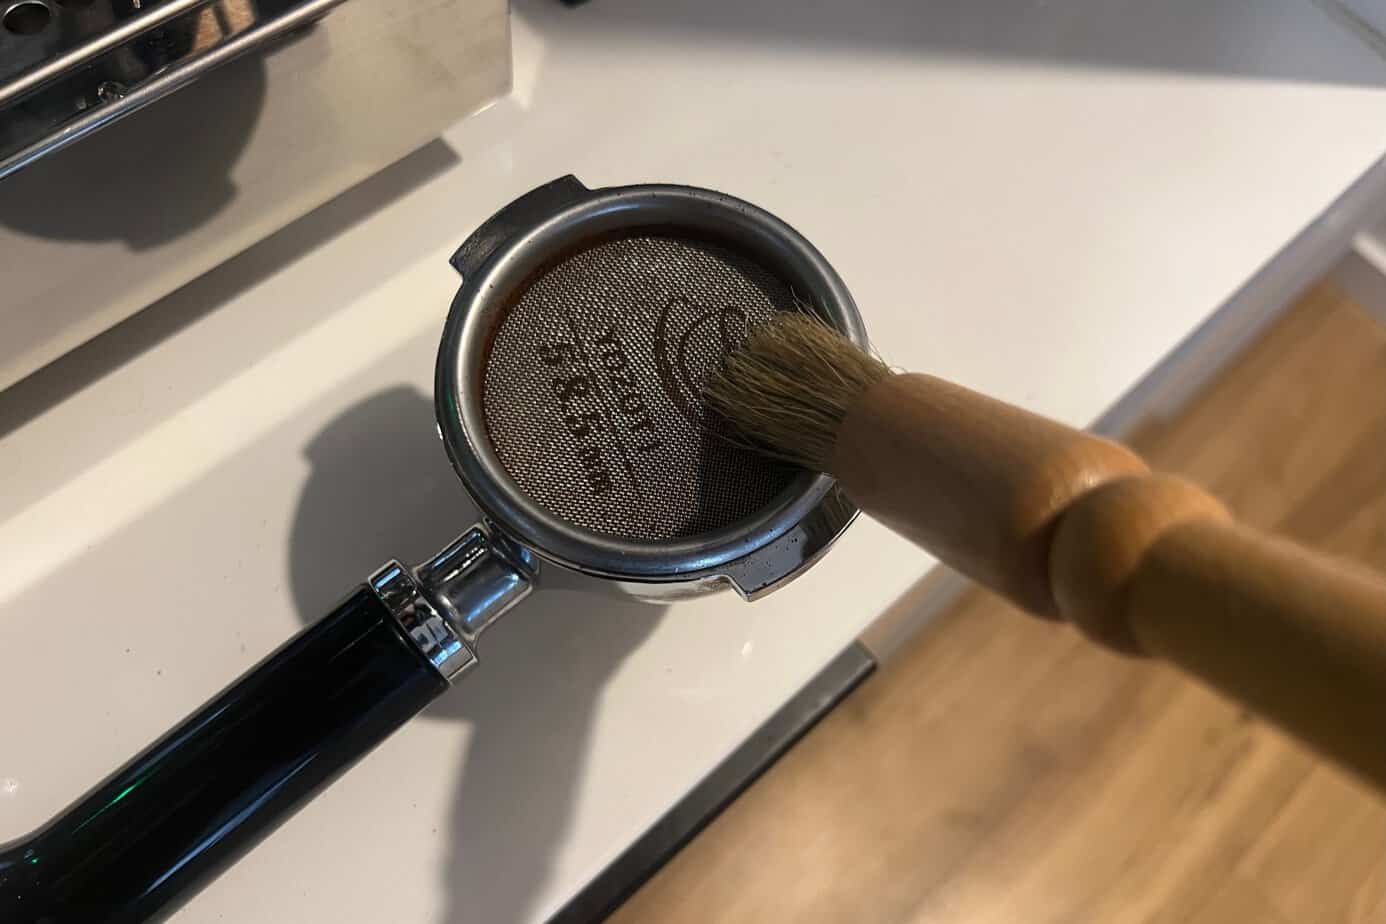 Coffee Brush Cleaning Basket